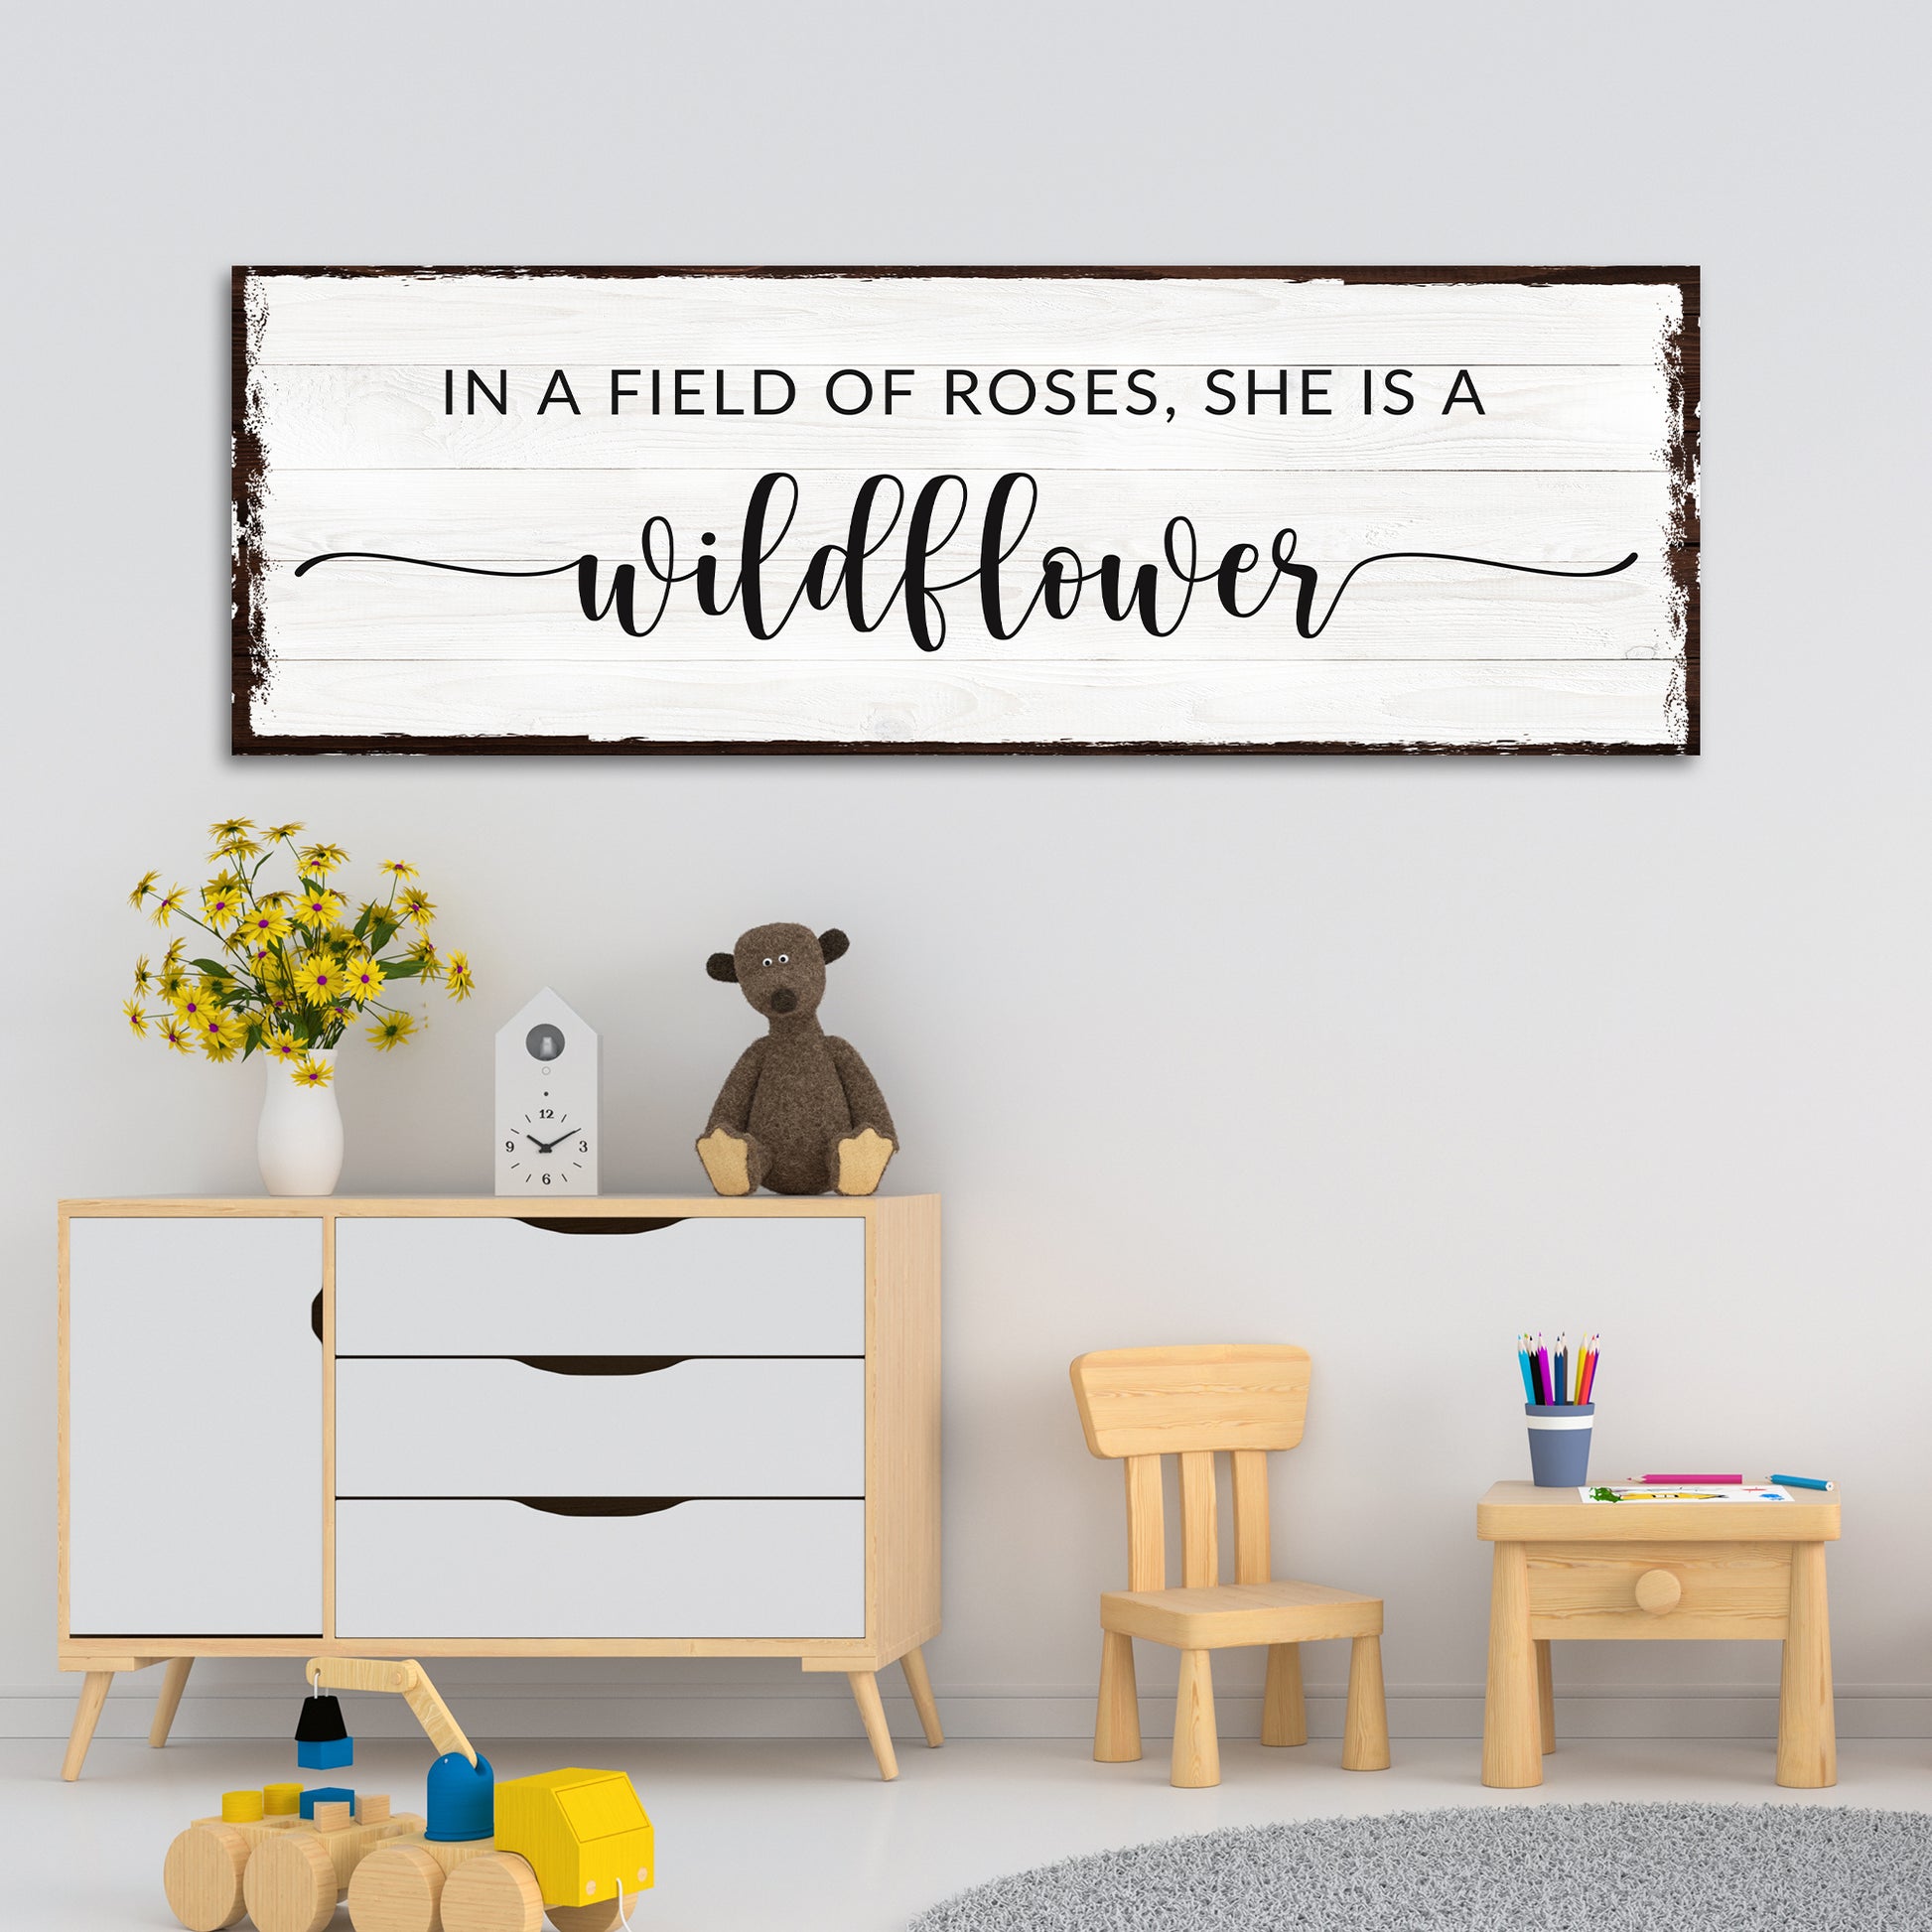 She is a Wildflower Sign - Image by Tailored Canvases